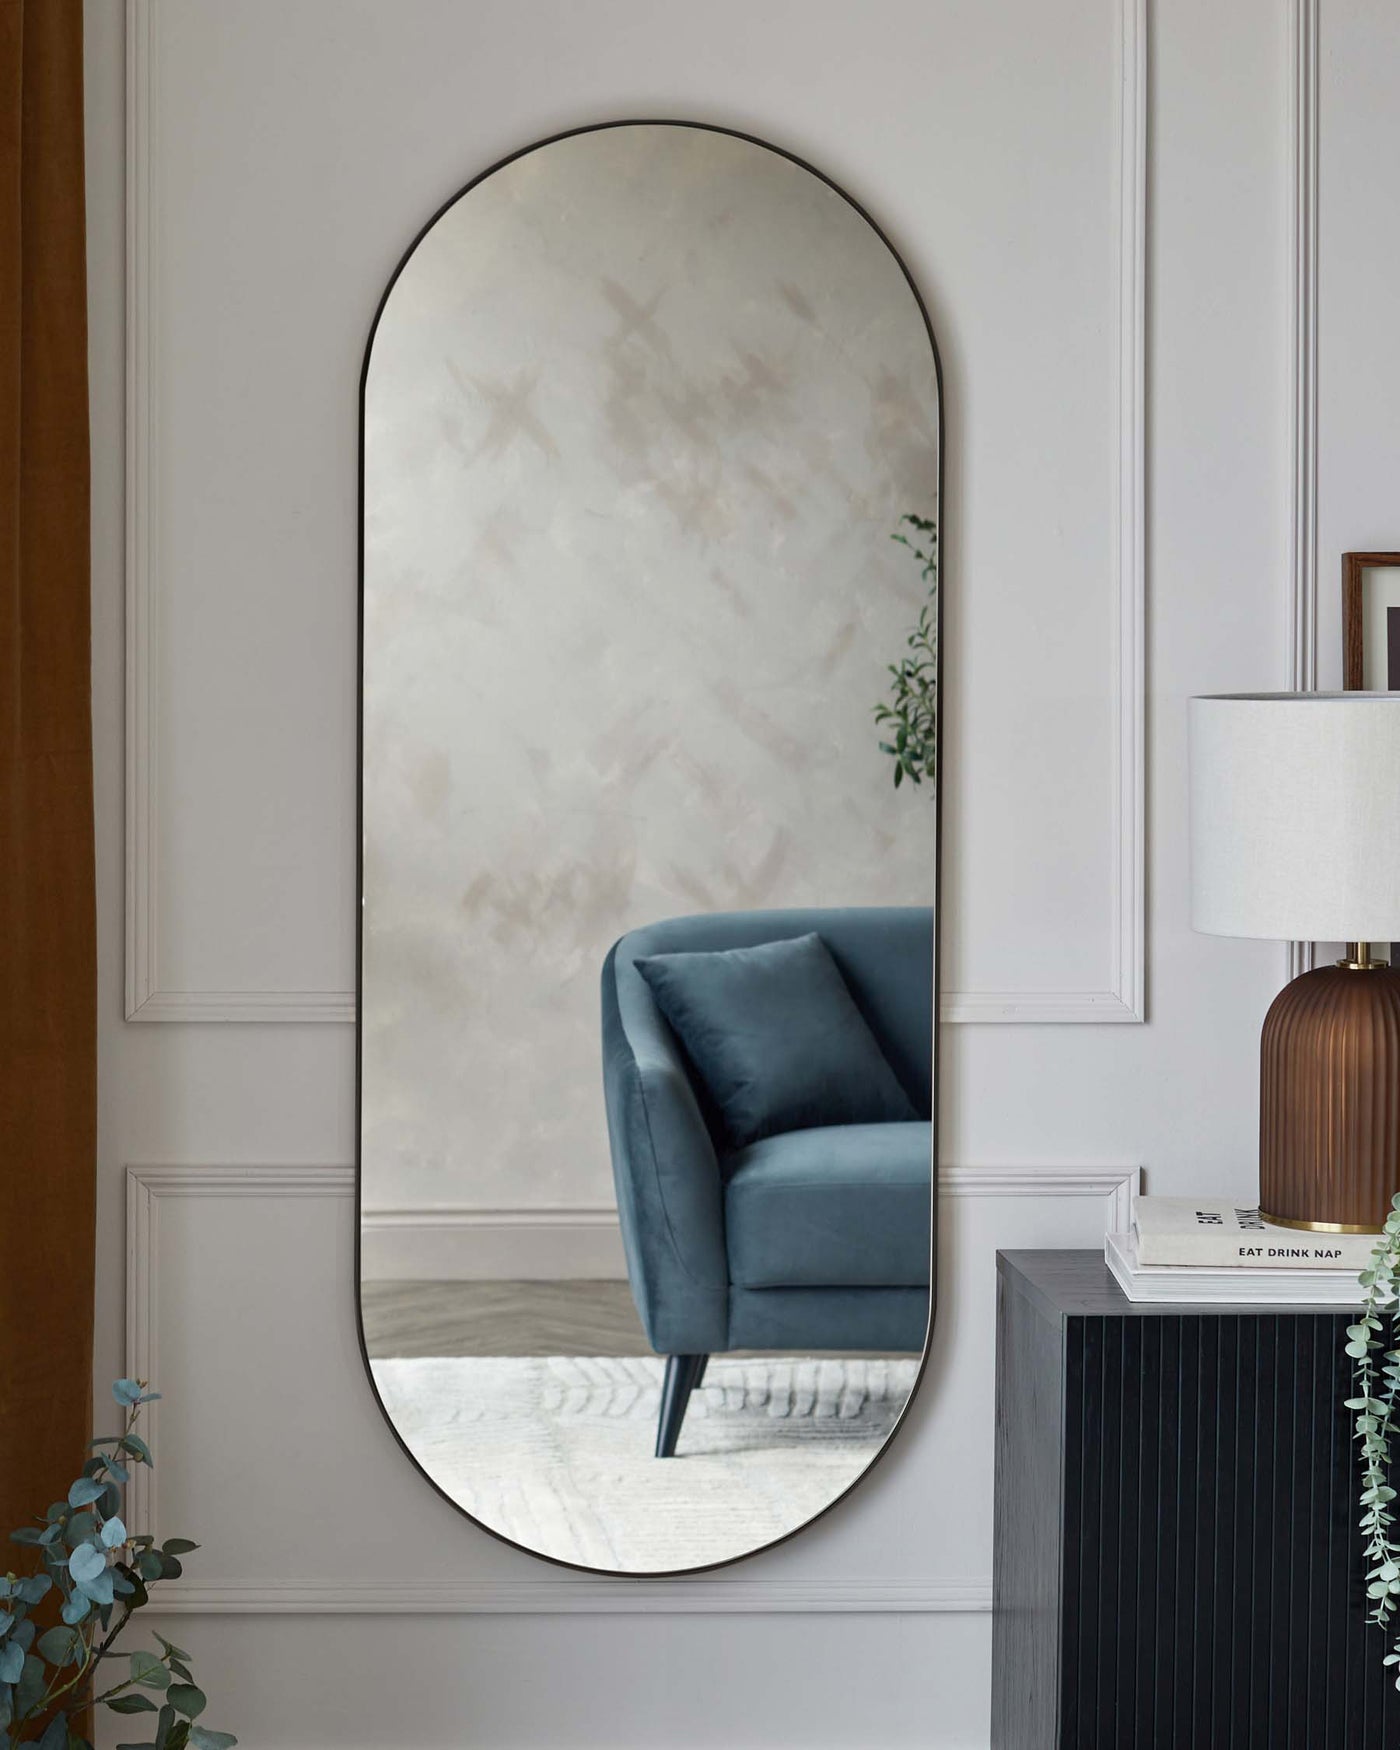 Elegant modern furniture including a plush velvet armchair in a deep blue tone with sleek metal legs, accompanied by a dark-toned wooden sideboard with vertical line detailing, and a classic white lamp with a cylindrical shade and a wooden base. A large, vertical, oval-shaped mirror with a simple frame is also featured, enhancing the room's spacious and sophisticated ambiance.